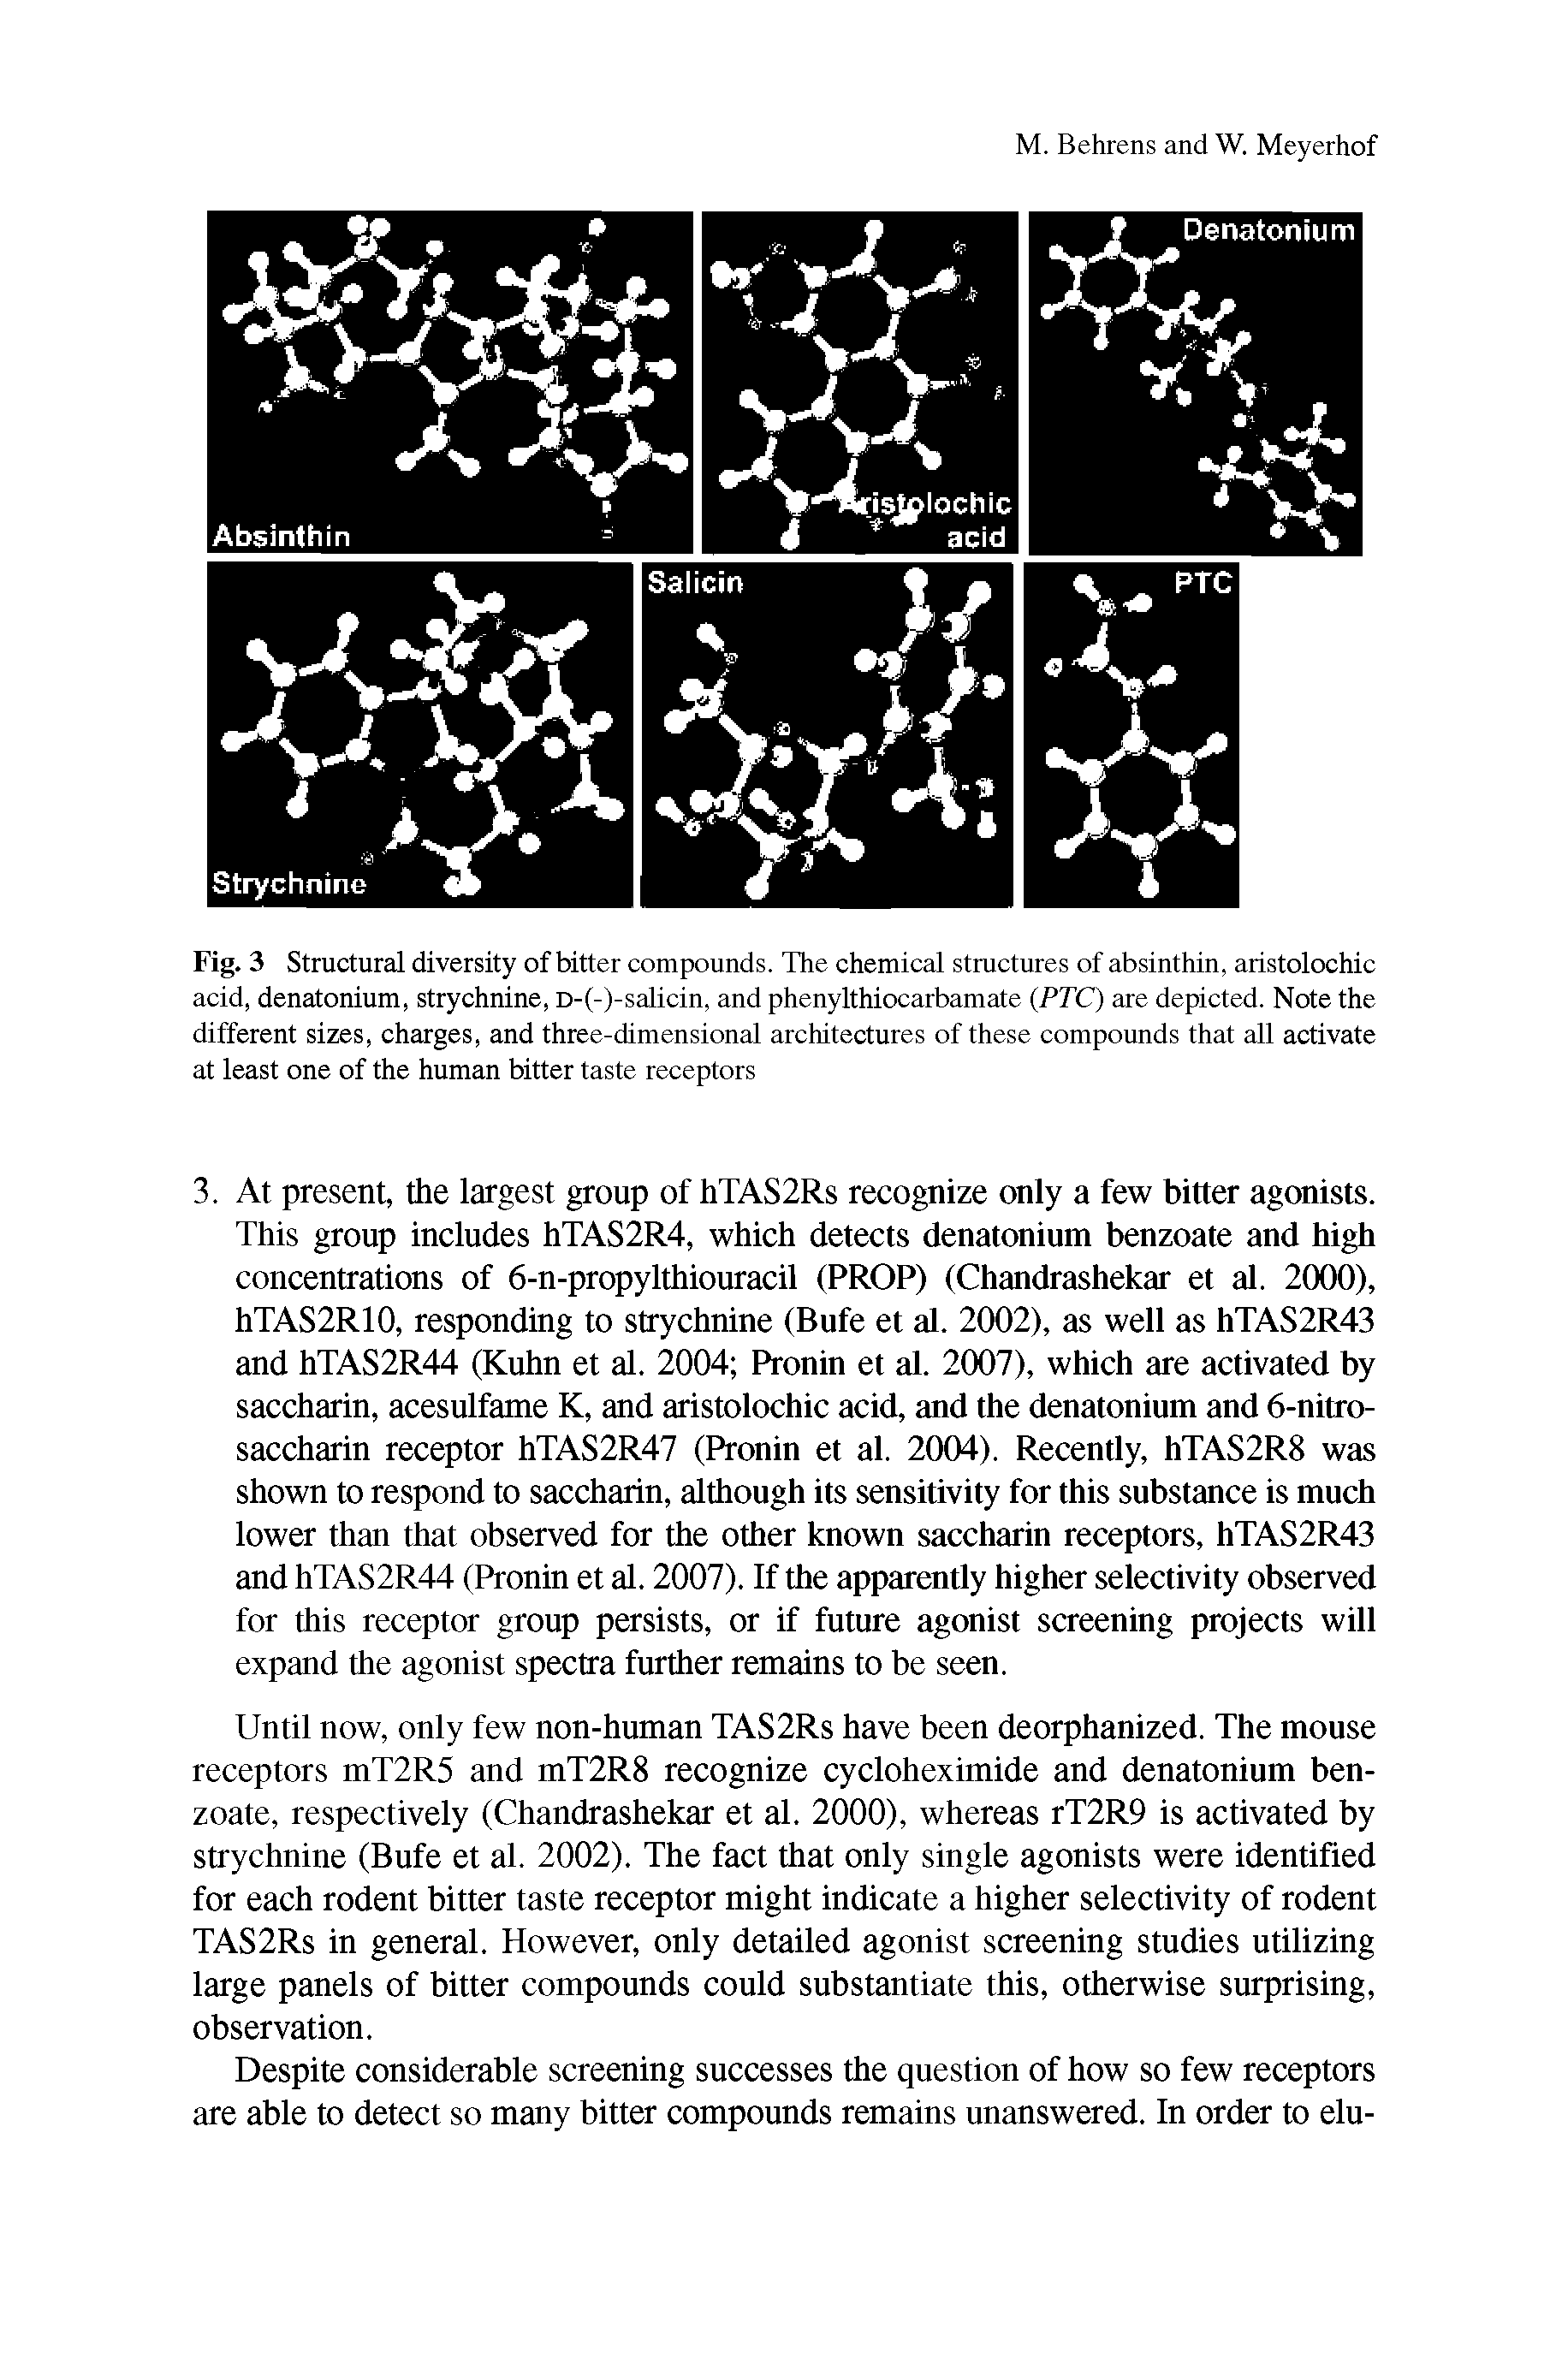 Fig. 3 Structural diversity of bitter compounds. The chemical structures of absinthin, aristolochic acid, denatonium, strychnine, D-(-)-salicin, and phenylthiocarbamate (PTC) are depicted. Note the different sizes, charges, and three-dimensional architectures of these compounds that all activate at least one of the human bitter taste receptors...